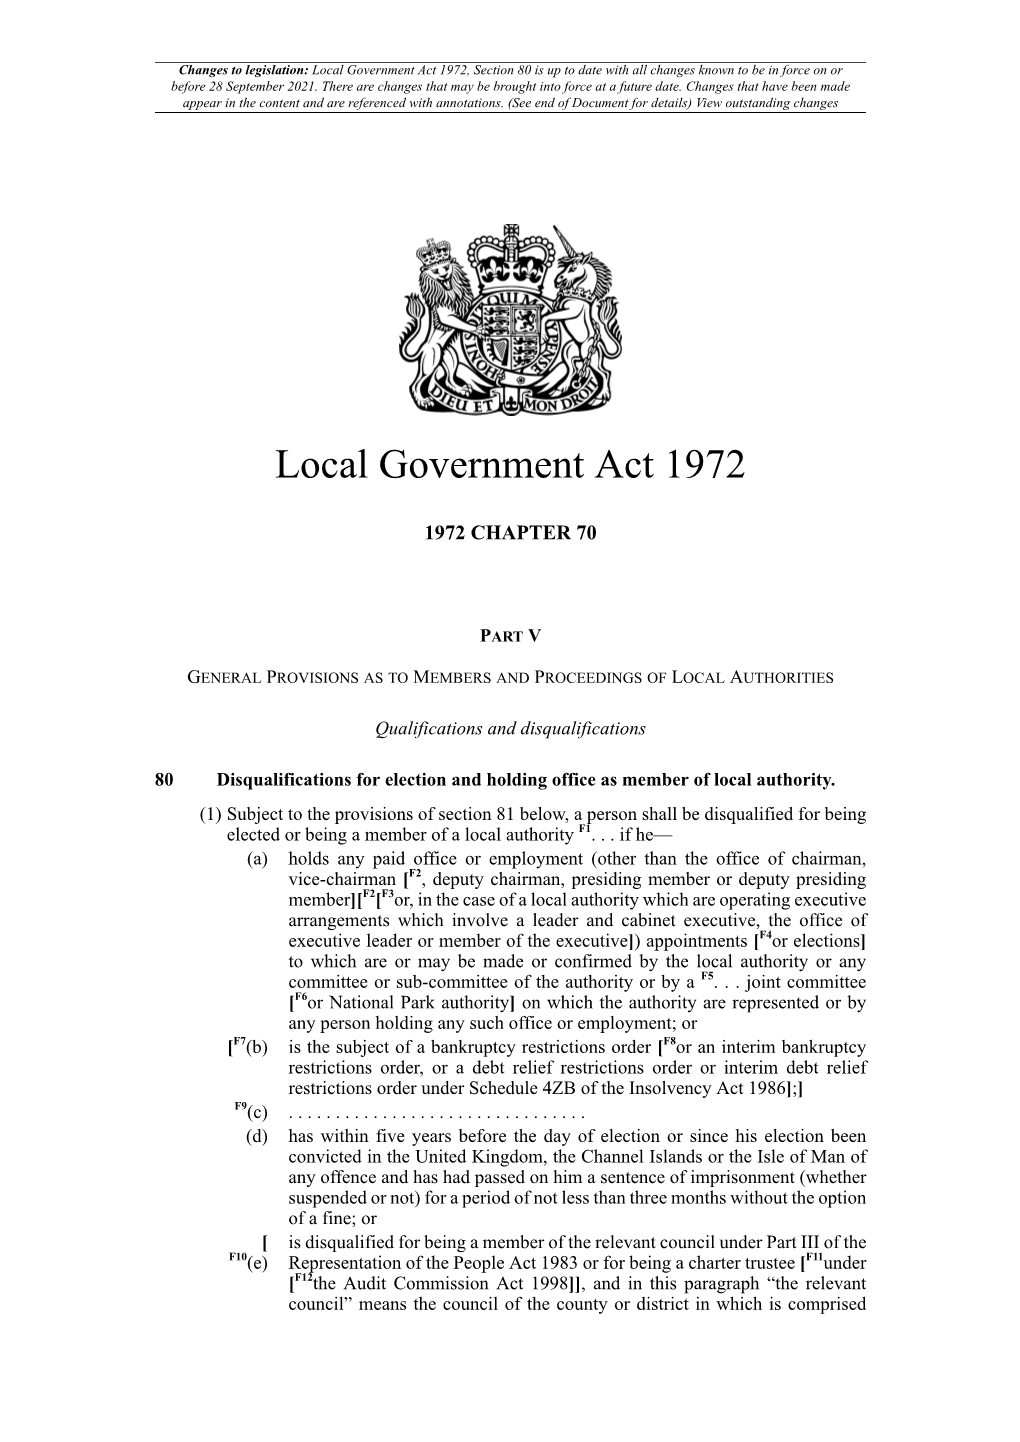 Local Government Act 1972, Section 80 Is up to Date with All Changes Known to Be in Force on Or Before 28 September 2021